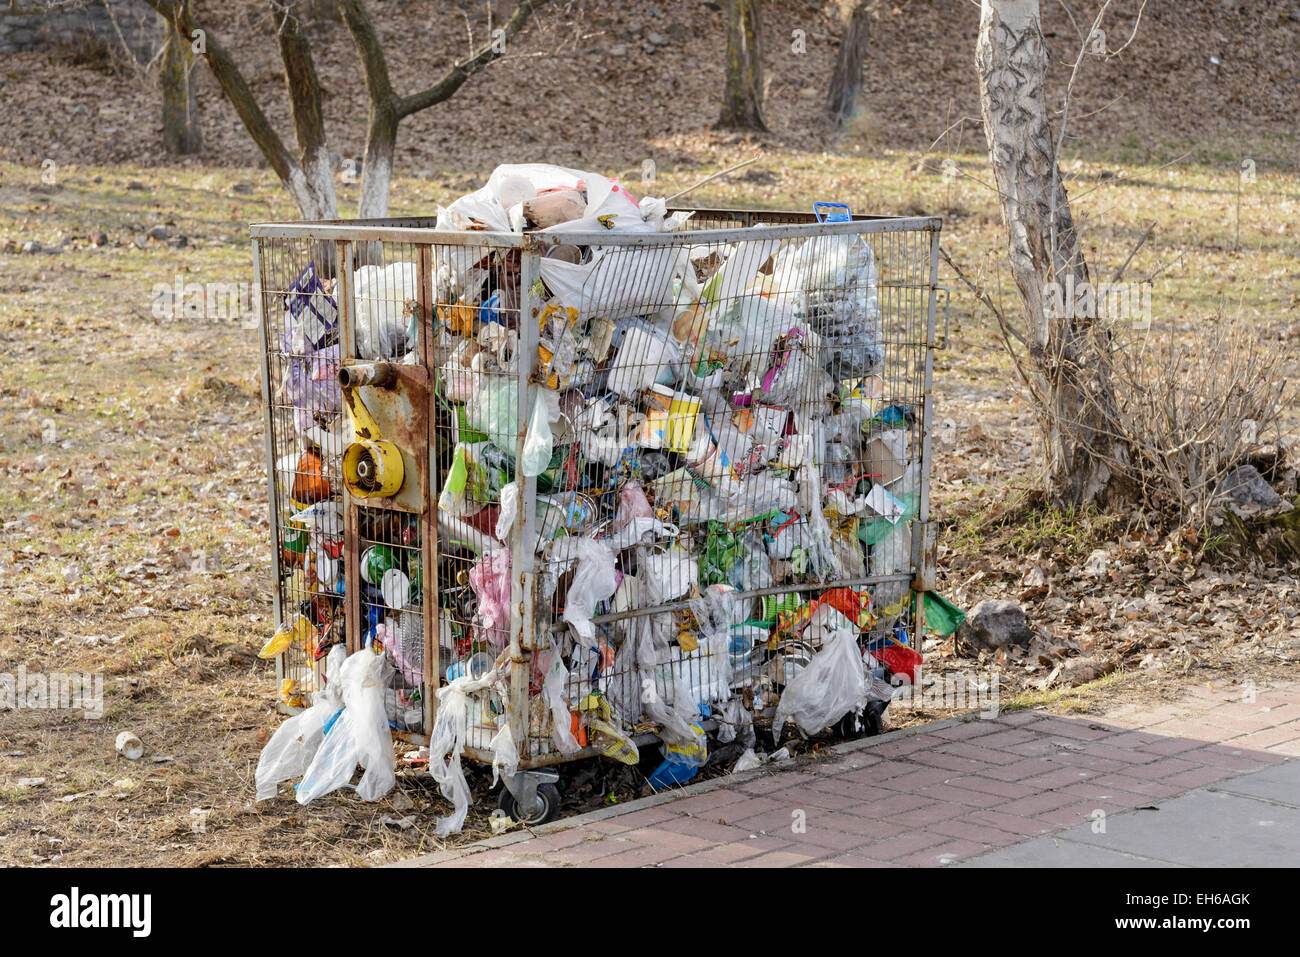 https://c8.alamy.com/comp/EH6AGK/metallic-garbage-container-full-of-trash-outdoor-in-the-country-EH6AGK.jpg